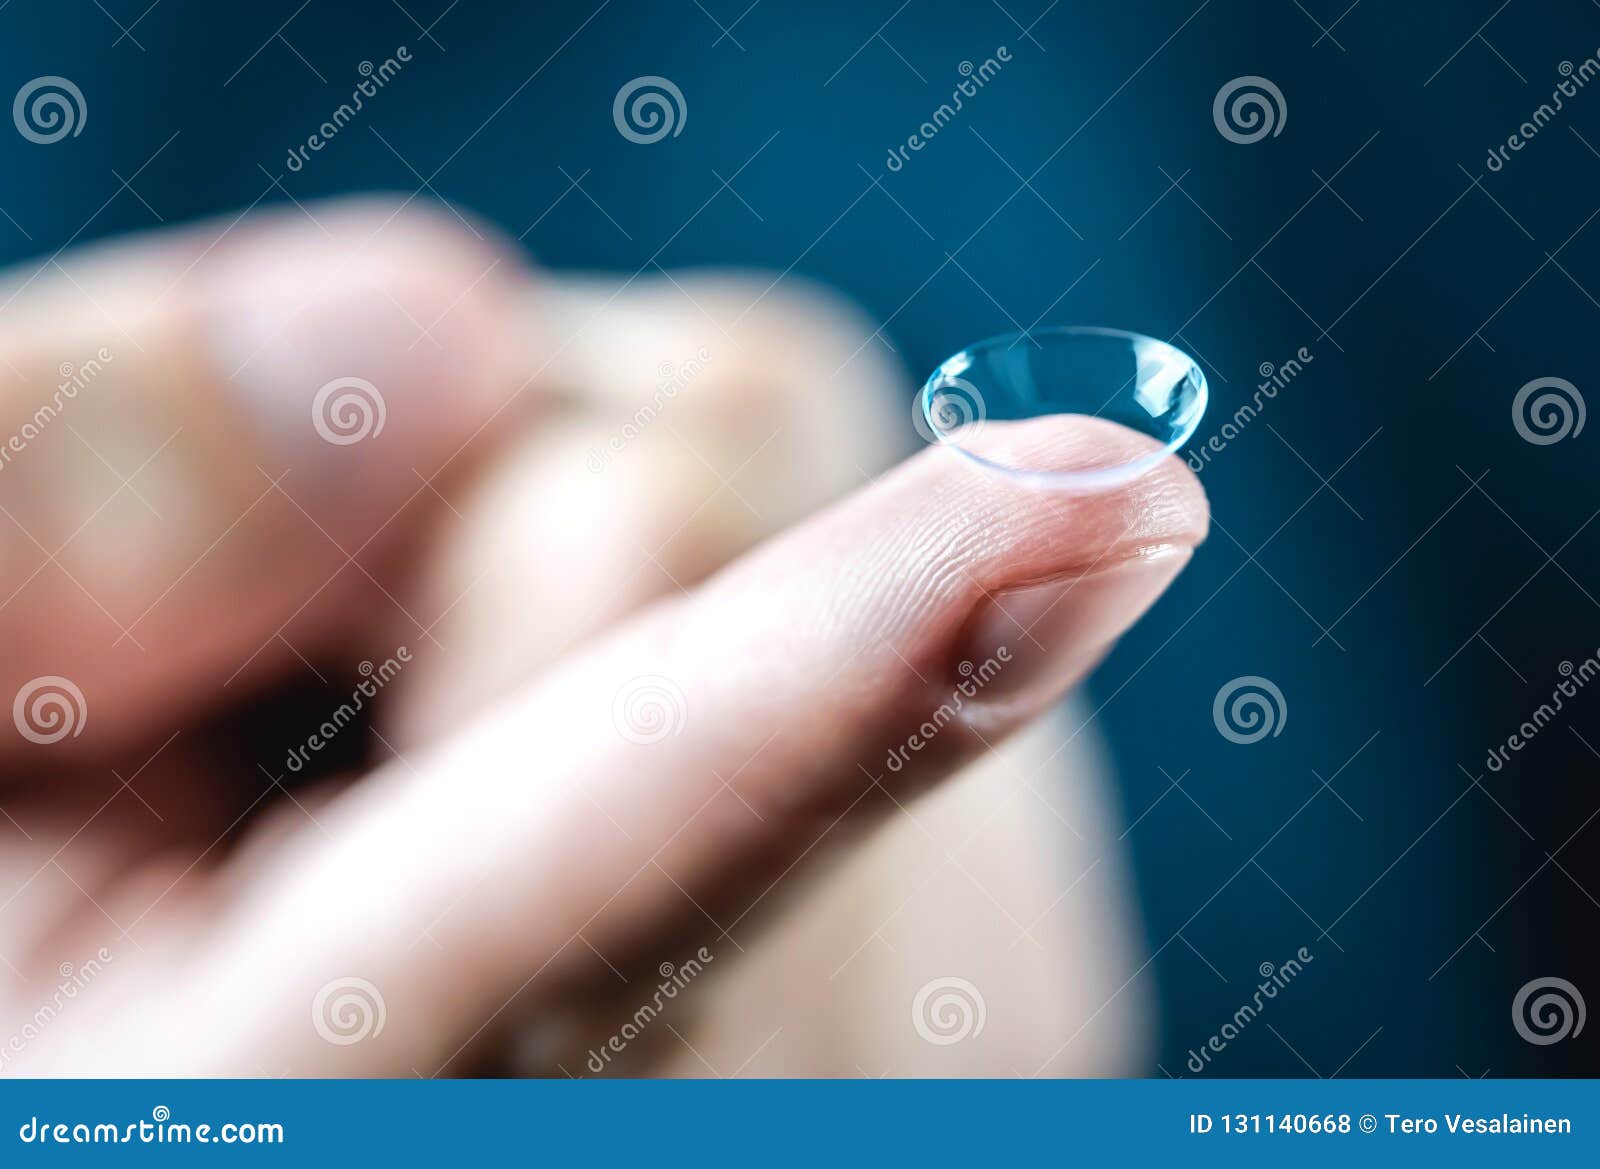 contact lenses macro close up. man holding lens on finger.